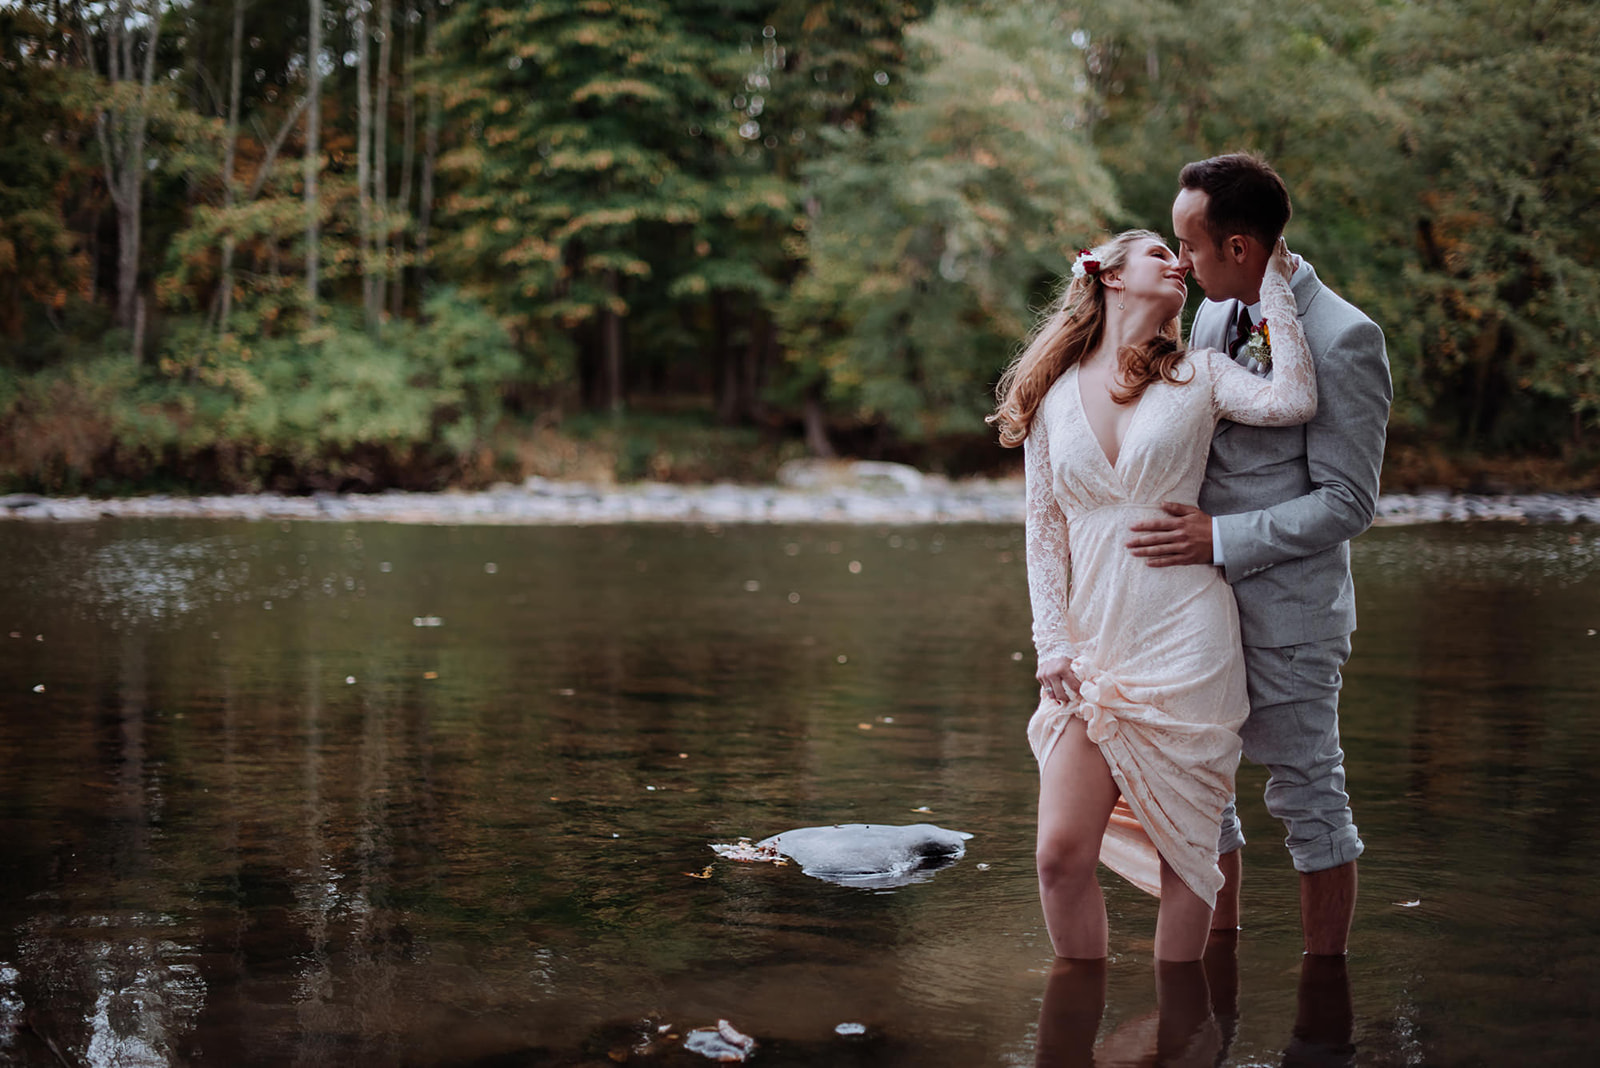 Couple romantically stand in shallow water while bride reaches back to caress her husbands face.